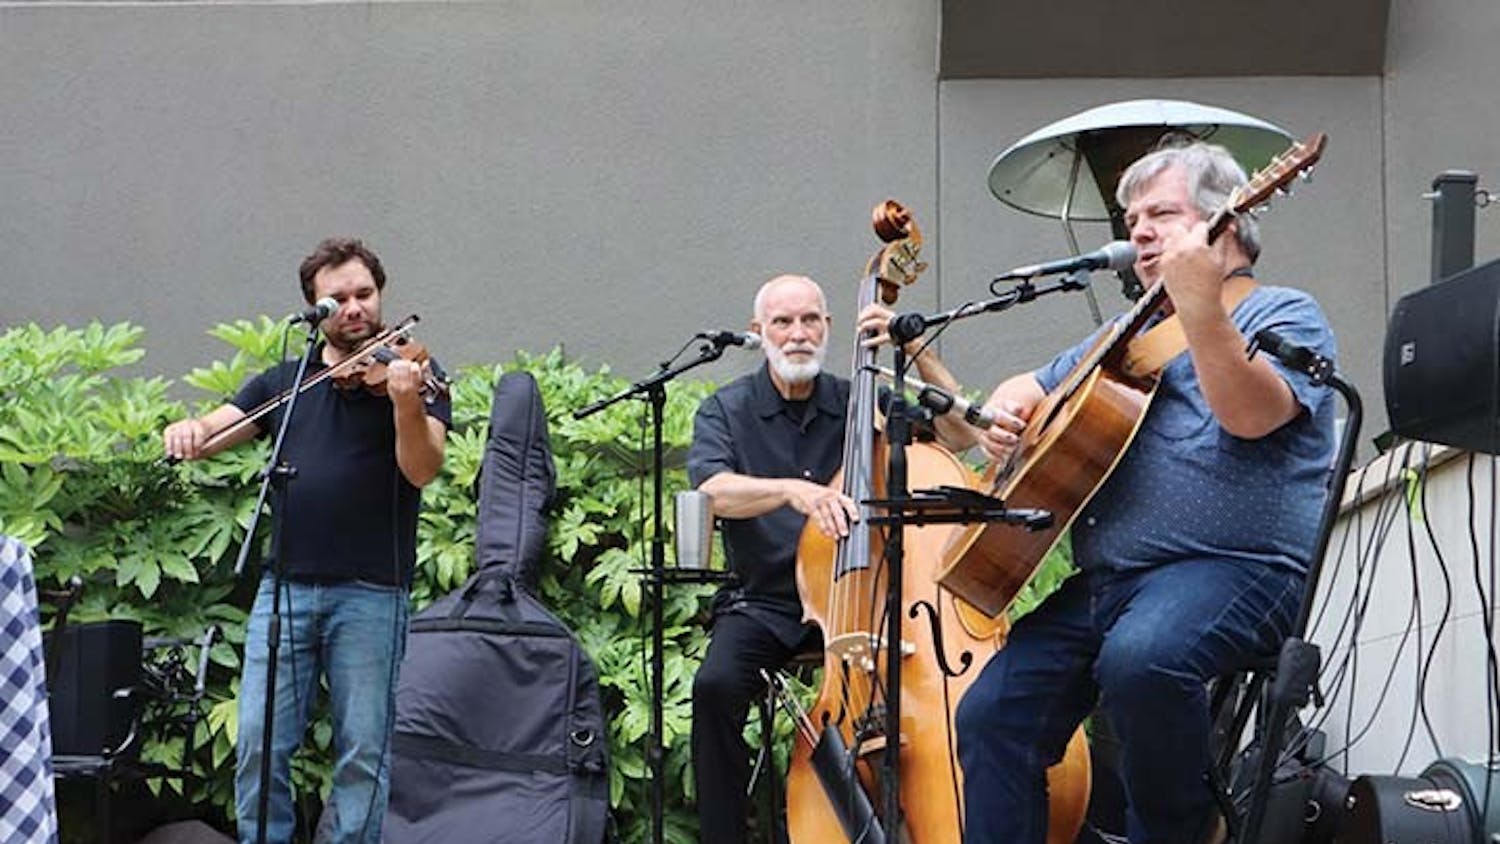 The Randy Lucas Trio performs bluegrass jazz at Bourbon Restaurant on May 26, 2022. The performance is a part of the "Jack-n-Jazz" series occurring every Thursday until the end of June.